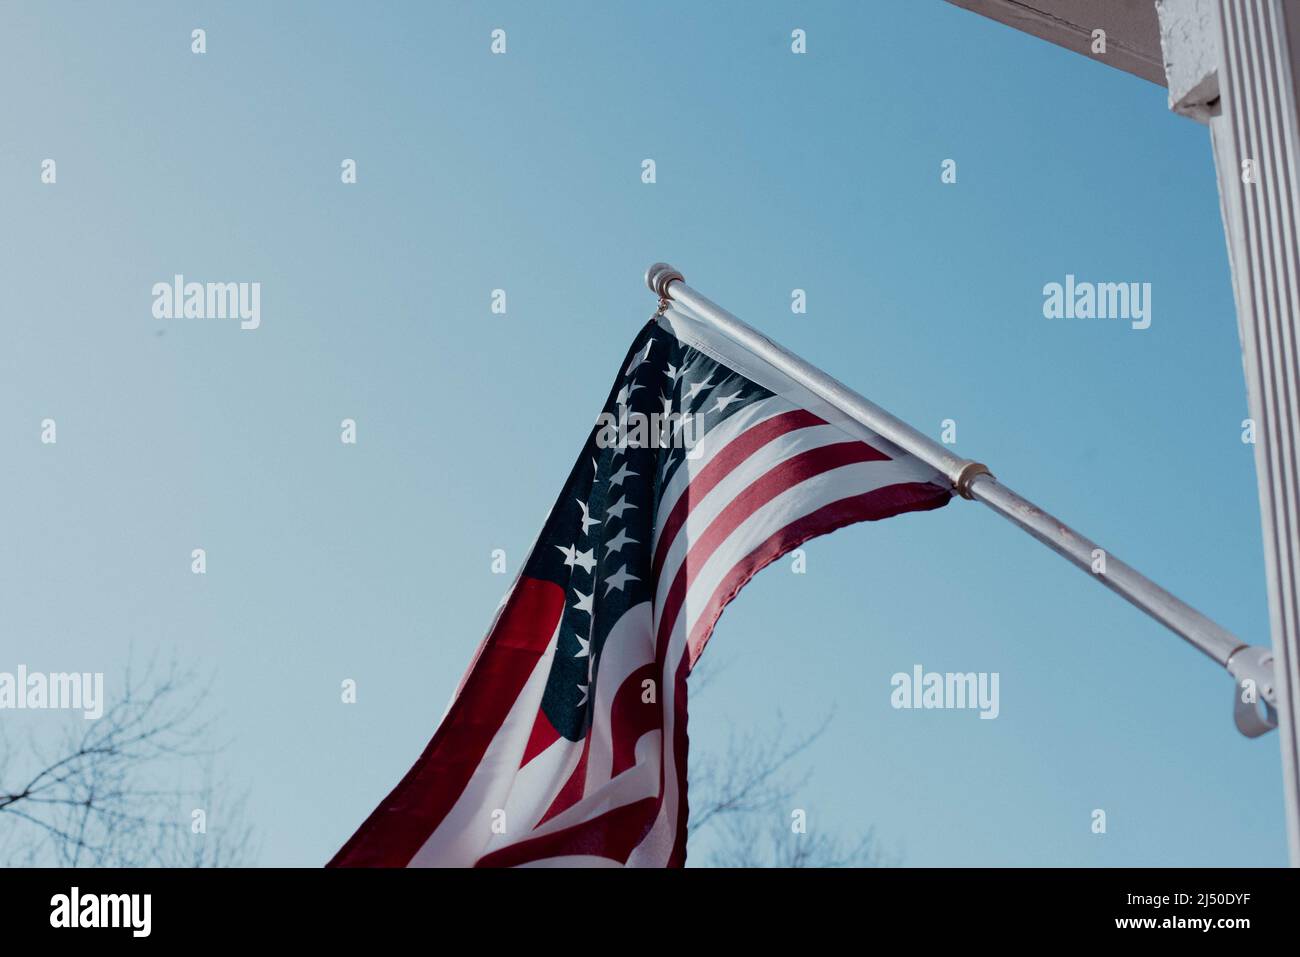 An American flag hangs outside a home against a blue sky. Stock Photo